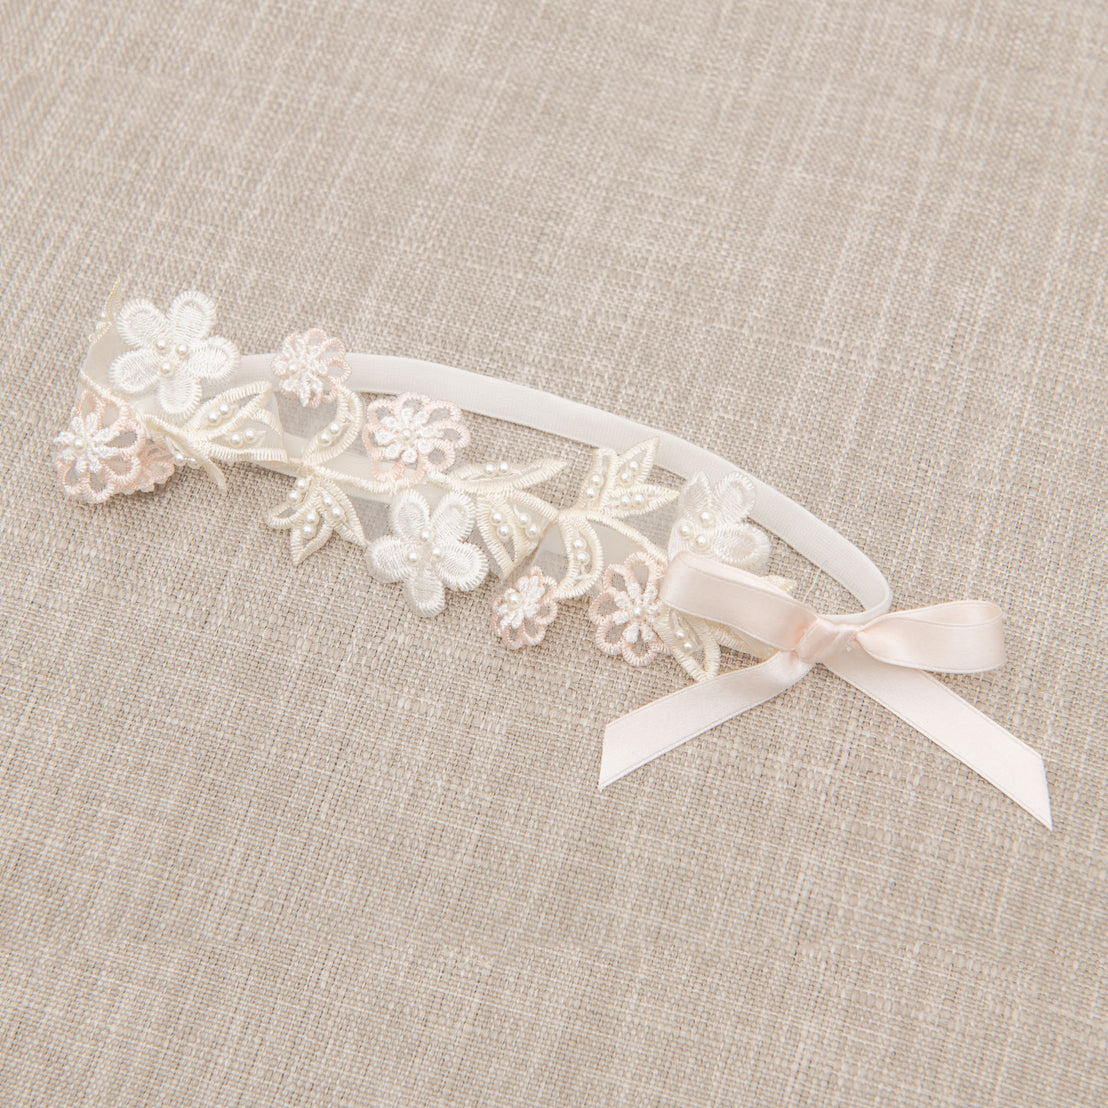 Flat lay photo of the Tessa Flower Headband. The headband is accented with beautiful pink and white floral appliqué and a pink silk ribbon bow.